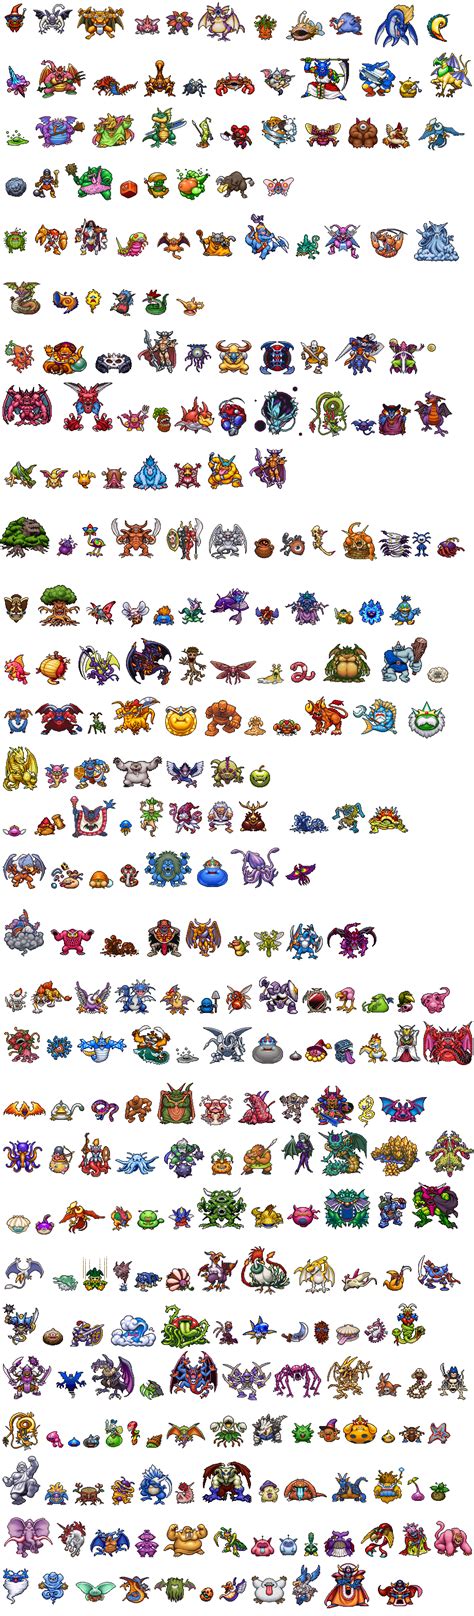 Gba | submitted by coquitaino04. Sprite Database Forums • View topic - Dragon Quest Monsters PlayStation Arranged Sprite Sheet